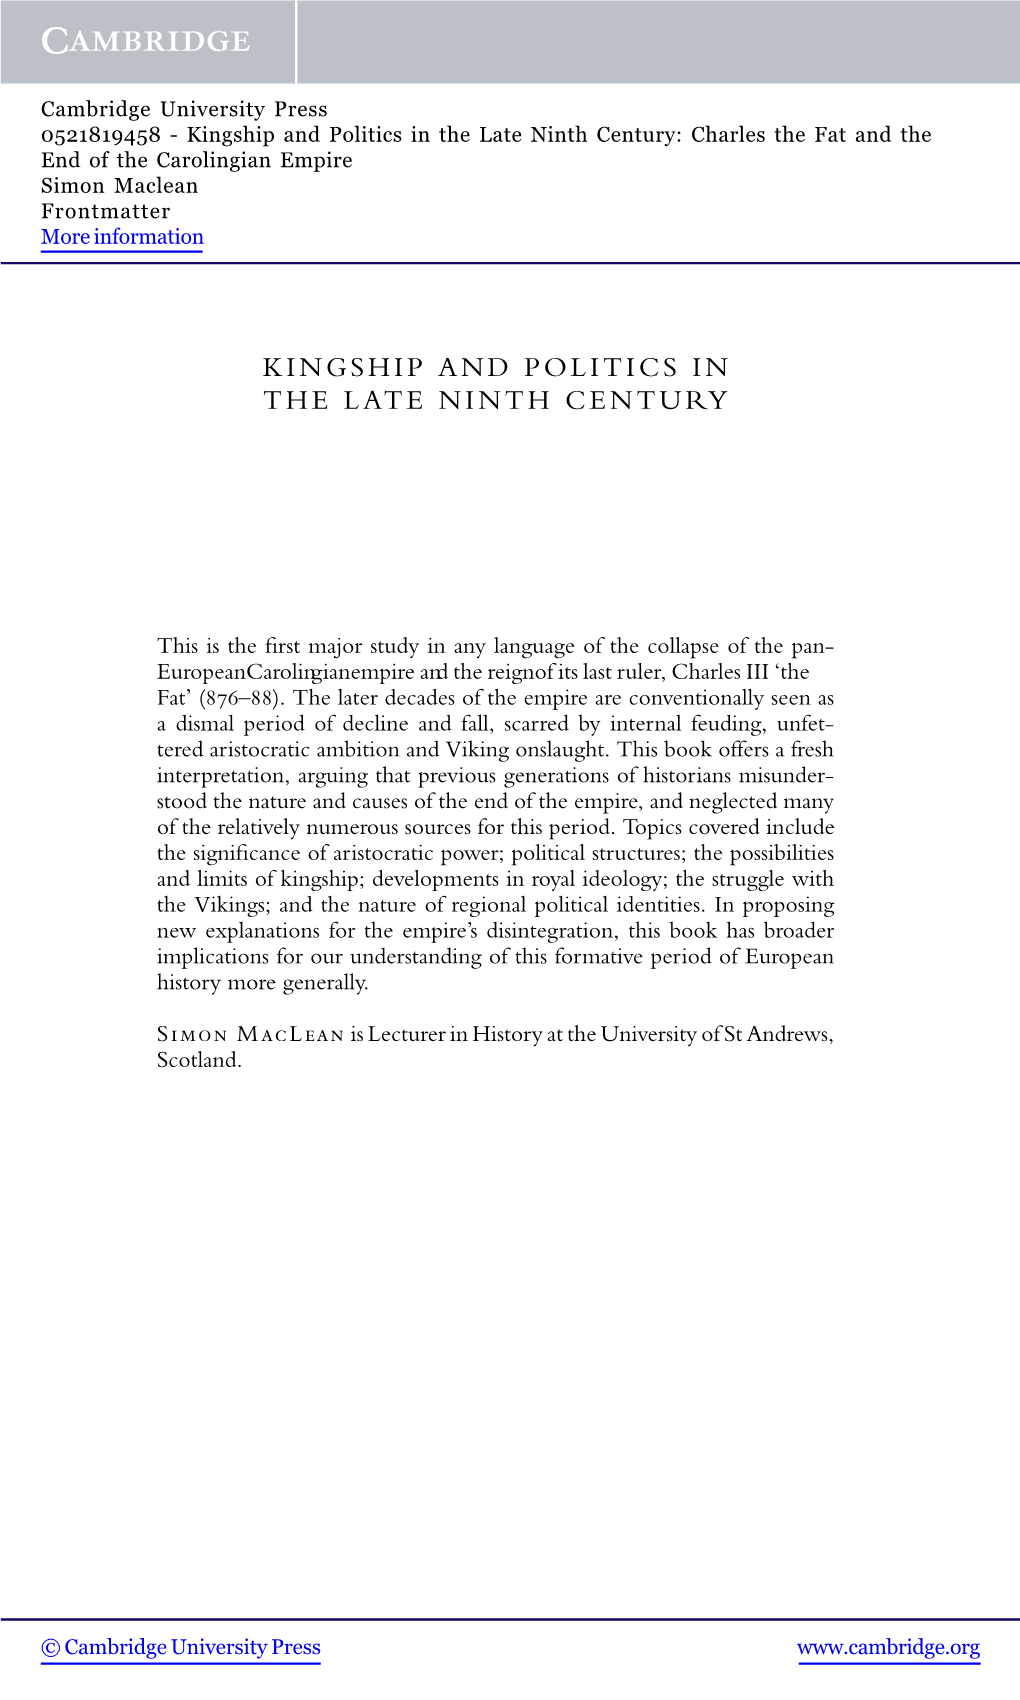 Kingship and Politics in the Late Ninth Century: Charles the Fat and the End of the Carolingian Empire Simon Maclean Frontmatter More Information